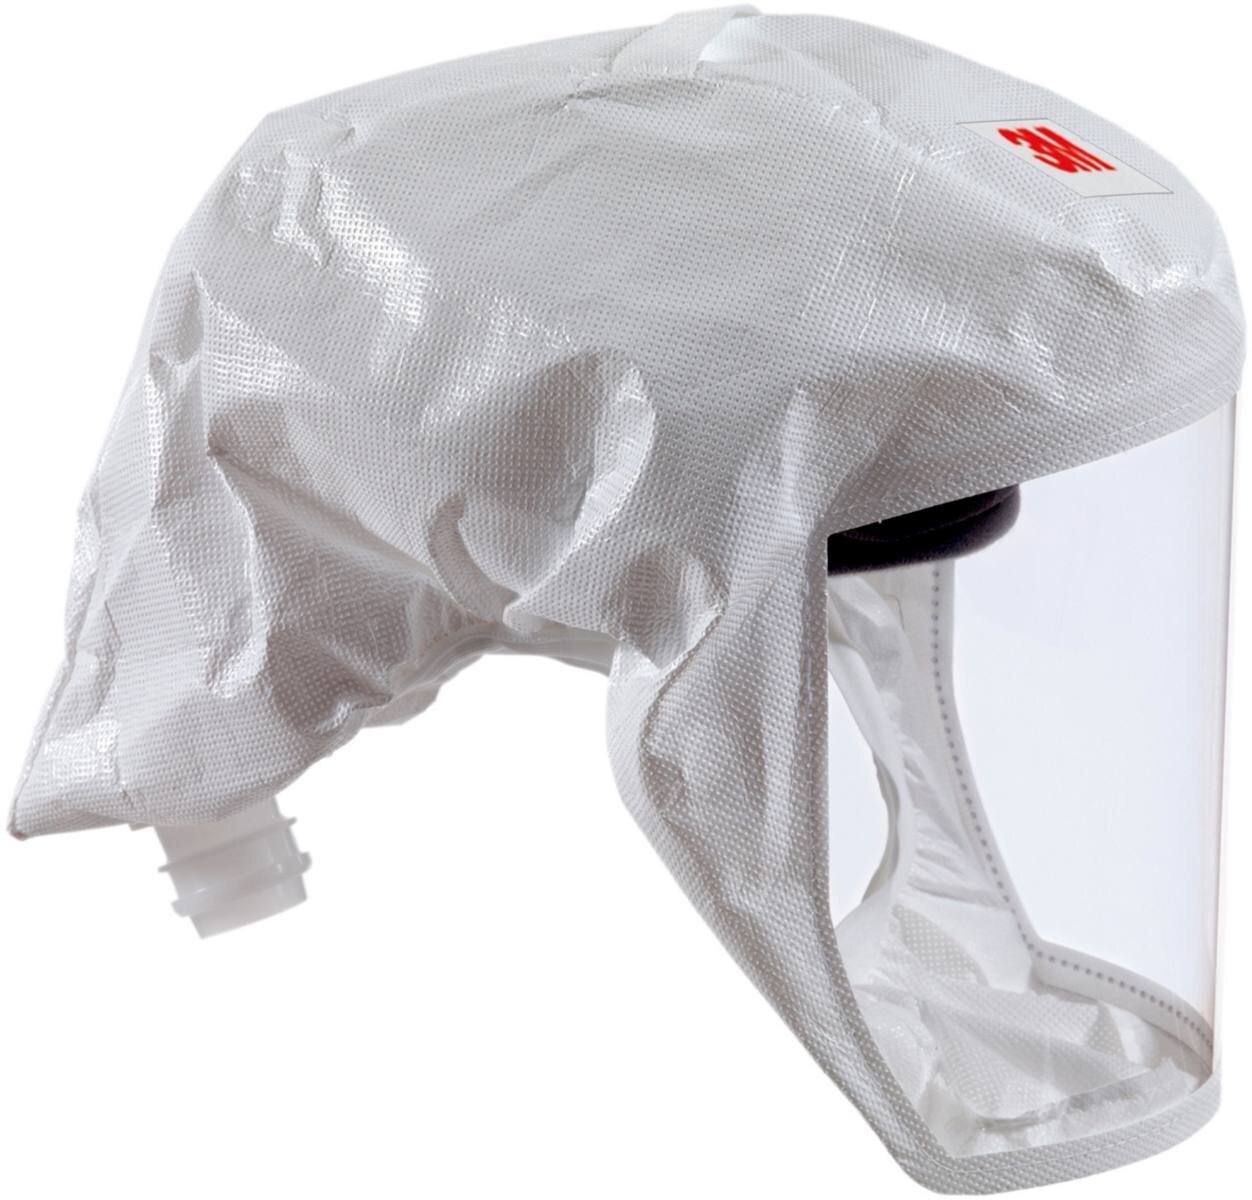 3M Versaflo Disposable lightweight bonnet S133S, with integrated head holder, white, universal textile material, size S/M - Material: Web 24